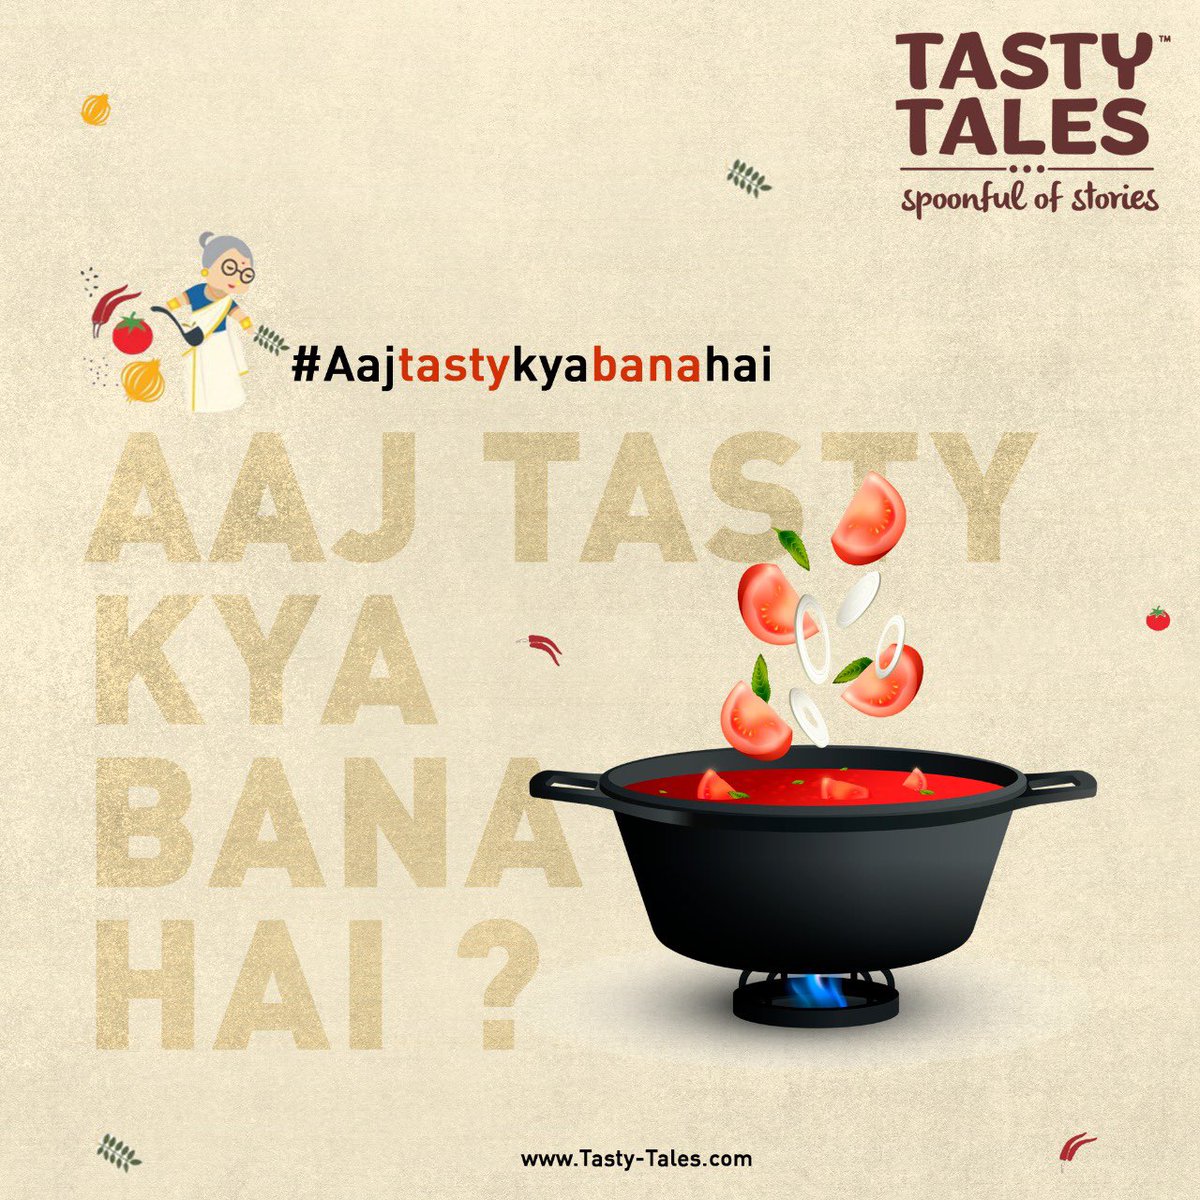 Have we answered your question yet? Aaj Tasty kya ban raha hai? Tell us what’s cooking tonight? #aajtastykyabanahai #TastyTales #Spoonfulofstories #readytocook #readyin20mintues #DishesallaroundIndia #deliciousCurryPastes #Easytomake #authenticcurrypastes #Justlikemommade